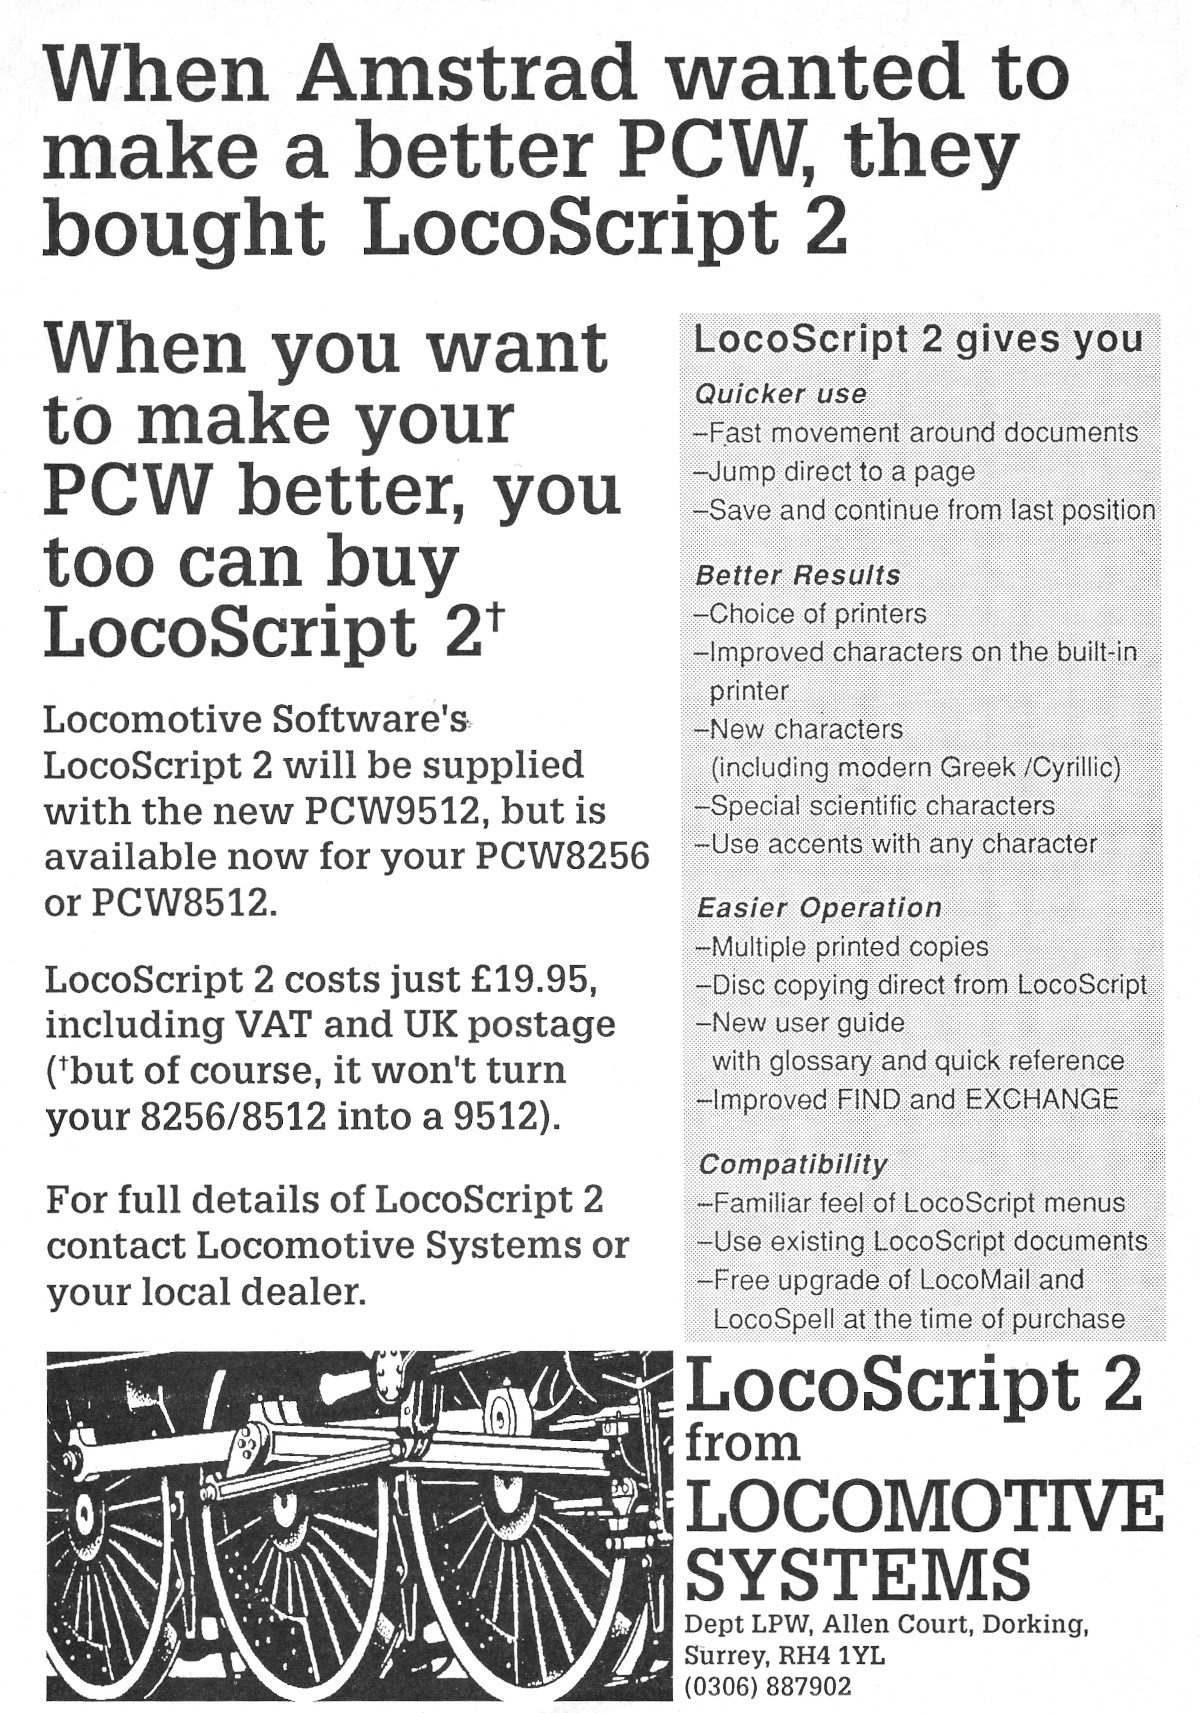 Locomotive Systems, from Dorking in Surrey, provided the LocoScript word processing package on the PC‍W8256 and later models. Here, it's offering the update LocoScript 2 - which was being supplied with the latest PC‍W9512. From Popular Computing Weekly, 7th August 1987